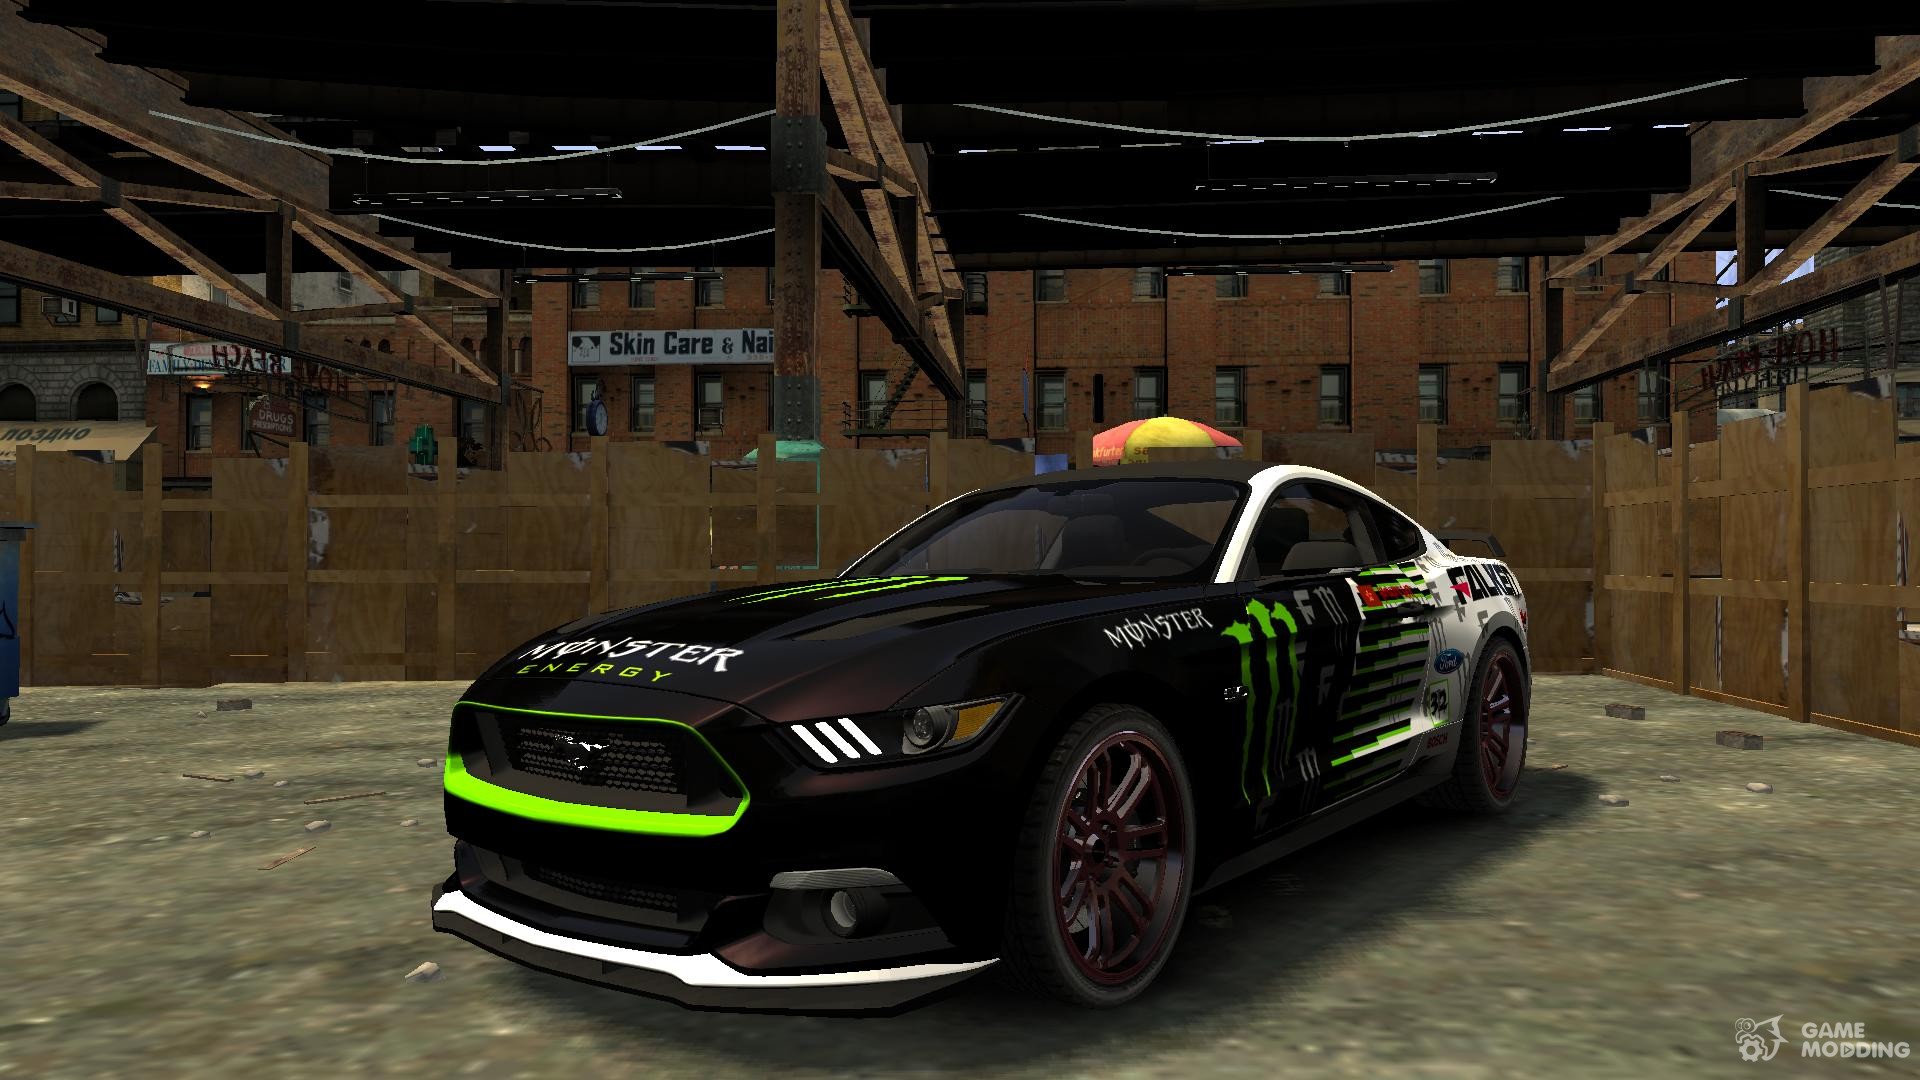 Madout 2 машины машина игра. Ford Mustang Monster Energy 2015. Ford Mustang gt Monster Energy. Ford Mustang Monster Energy в Мэдаут 2. Винилы на Мустанг в мадаут.